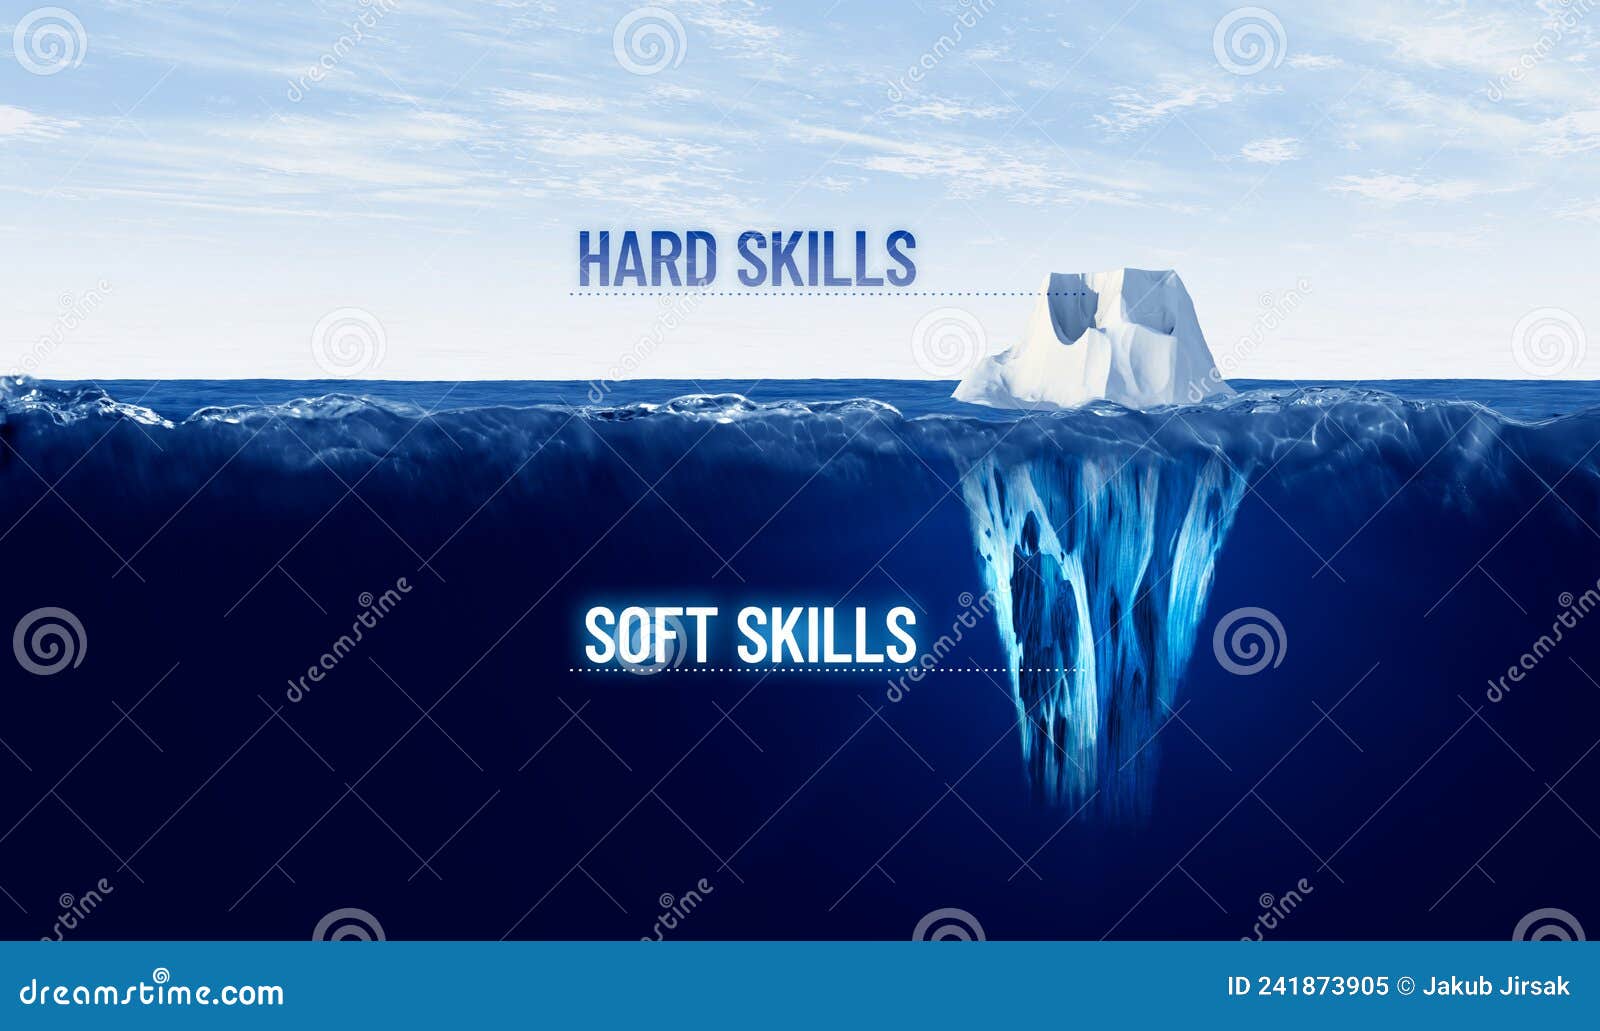 discover and improve soft skills concept